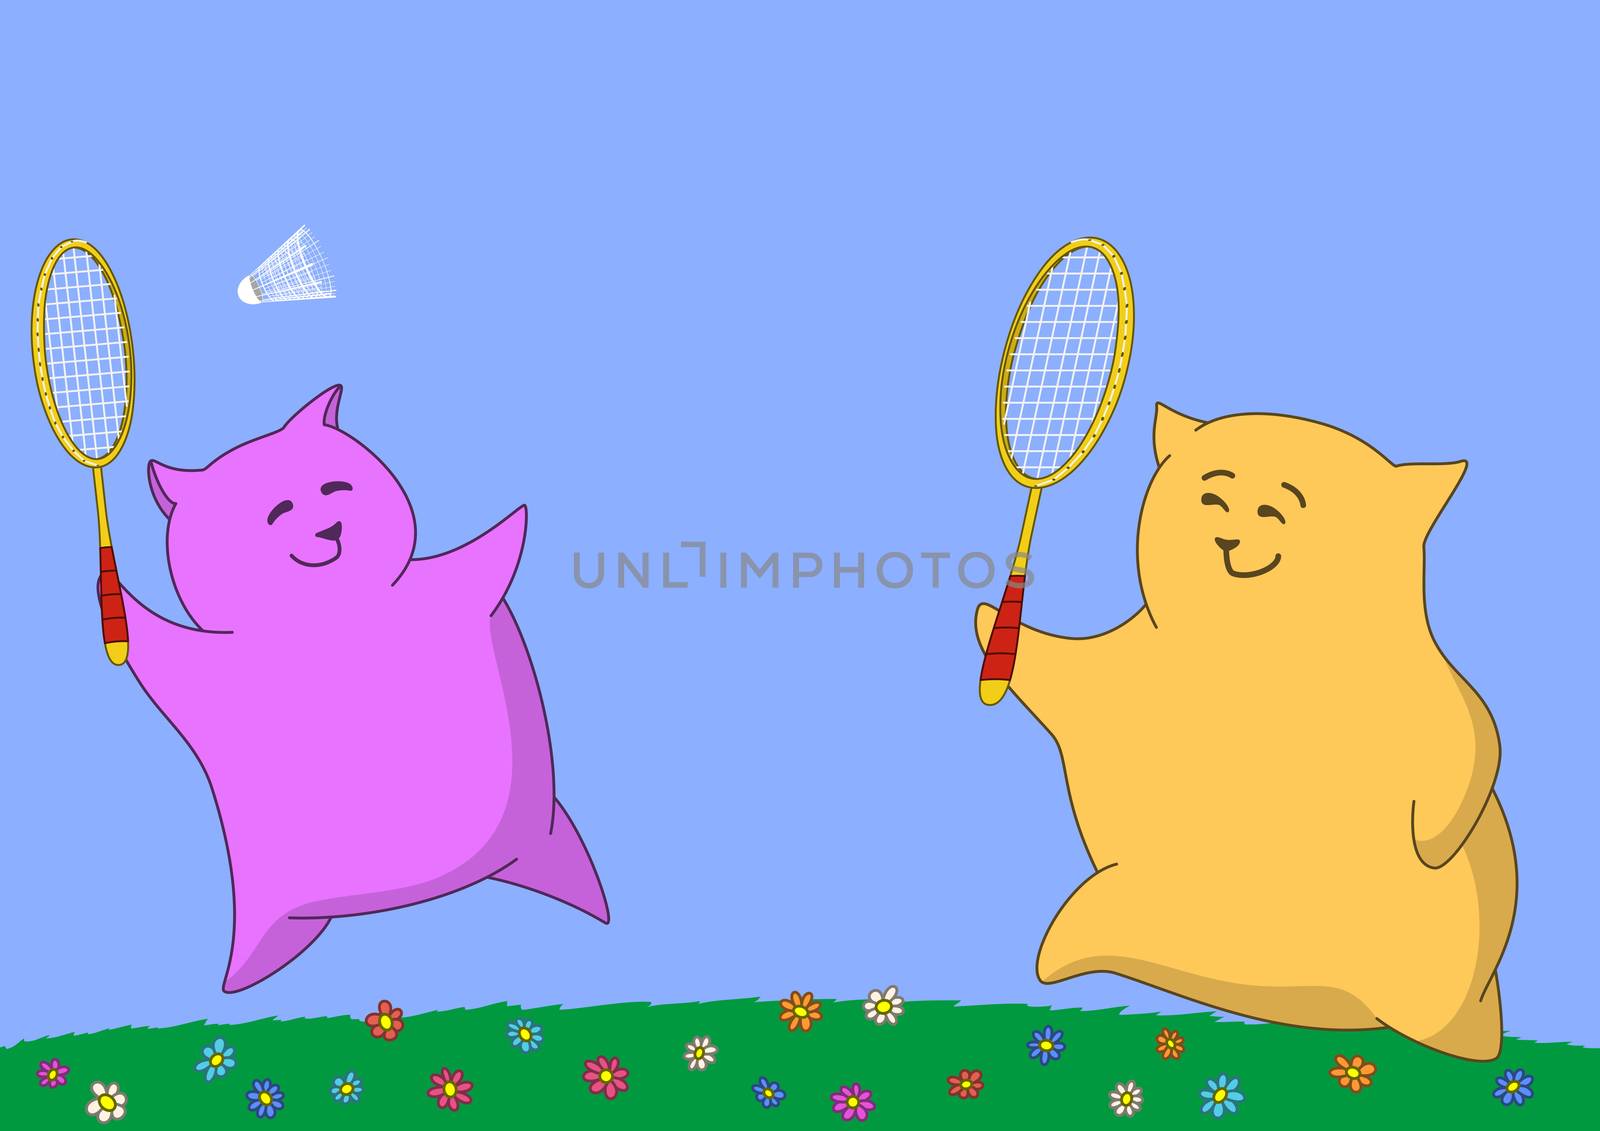 Pillows: mother and the son cheerfully play badminton on a blossoming meadow